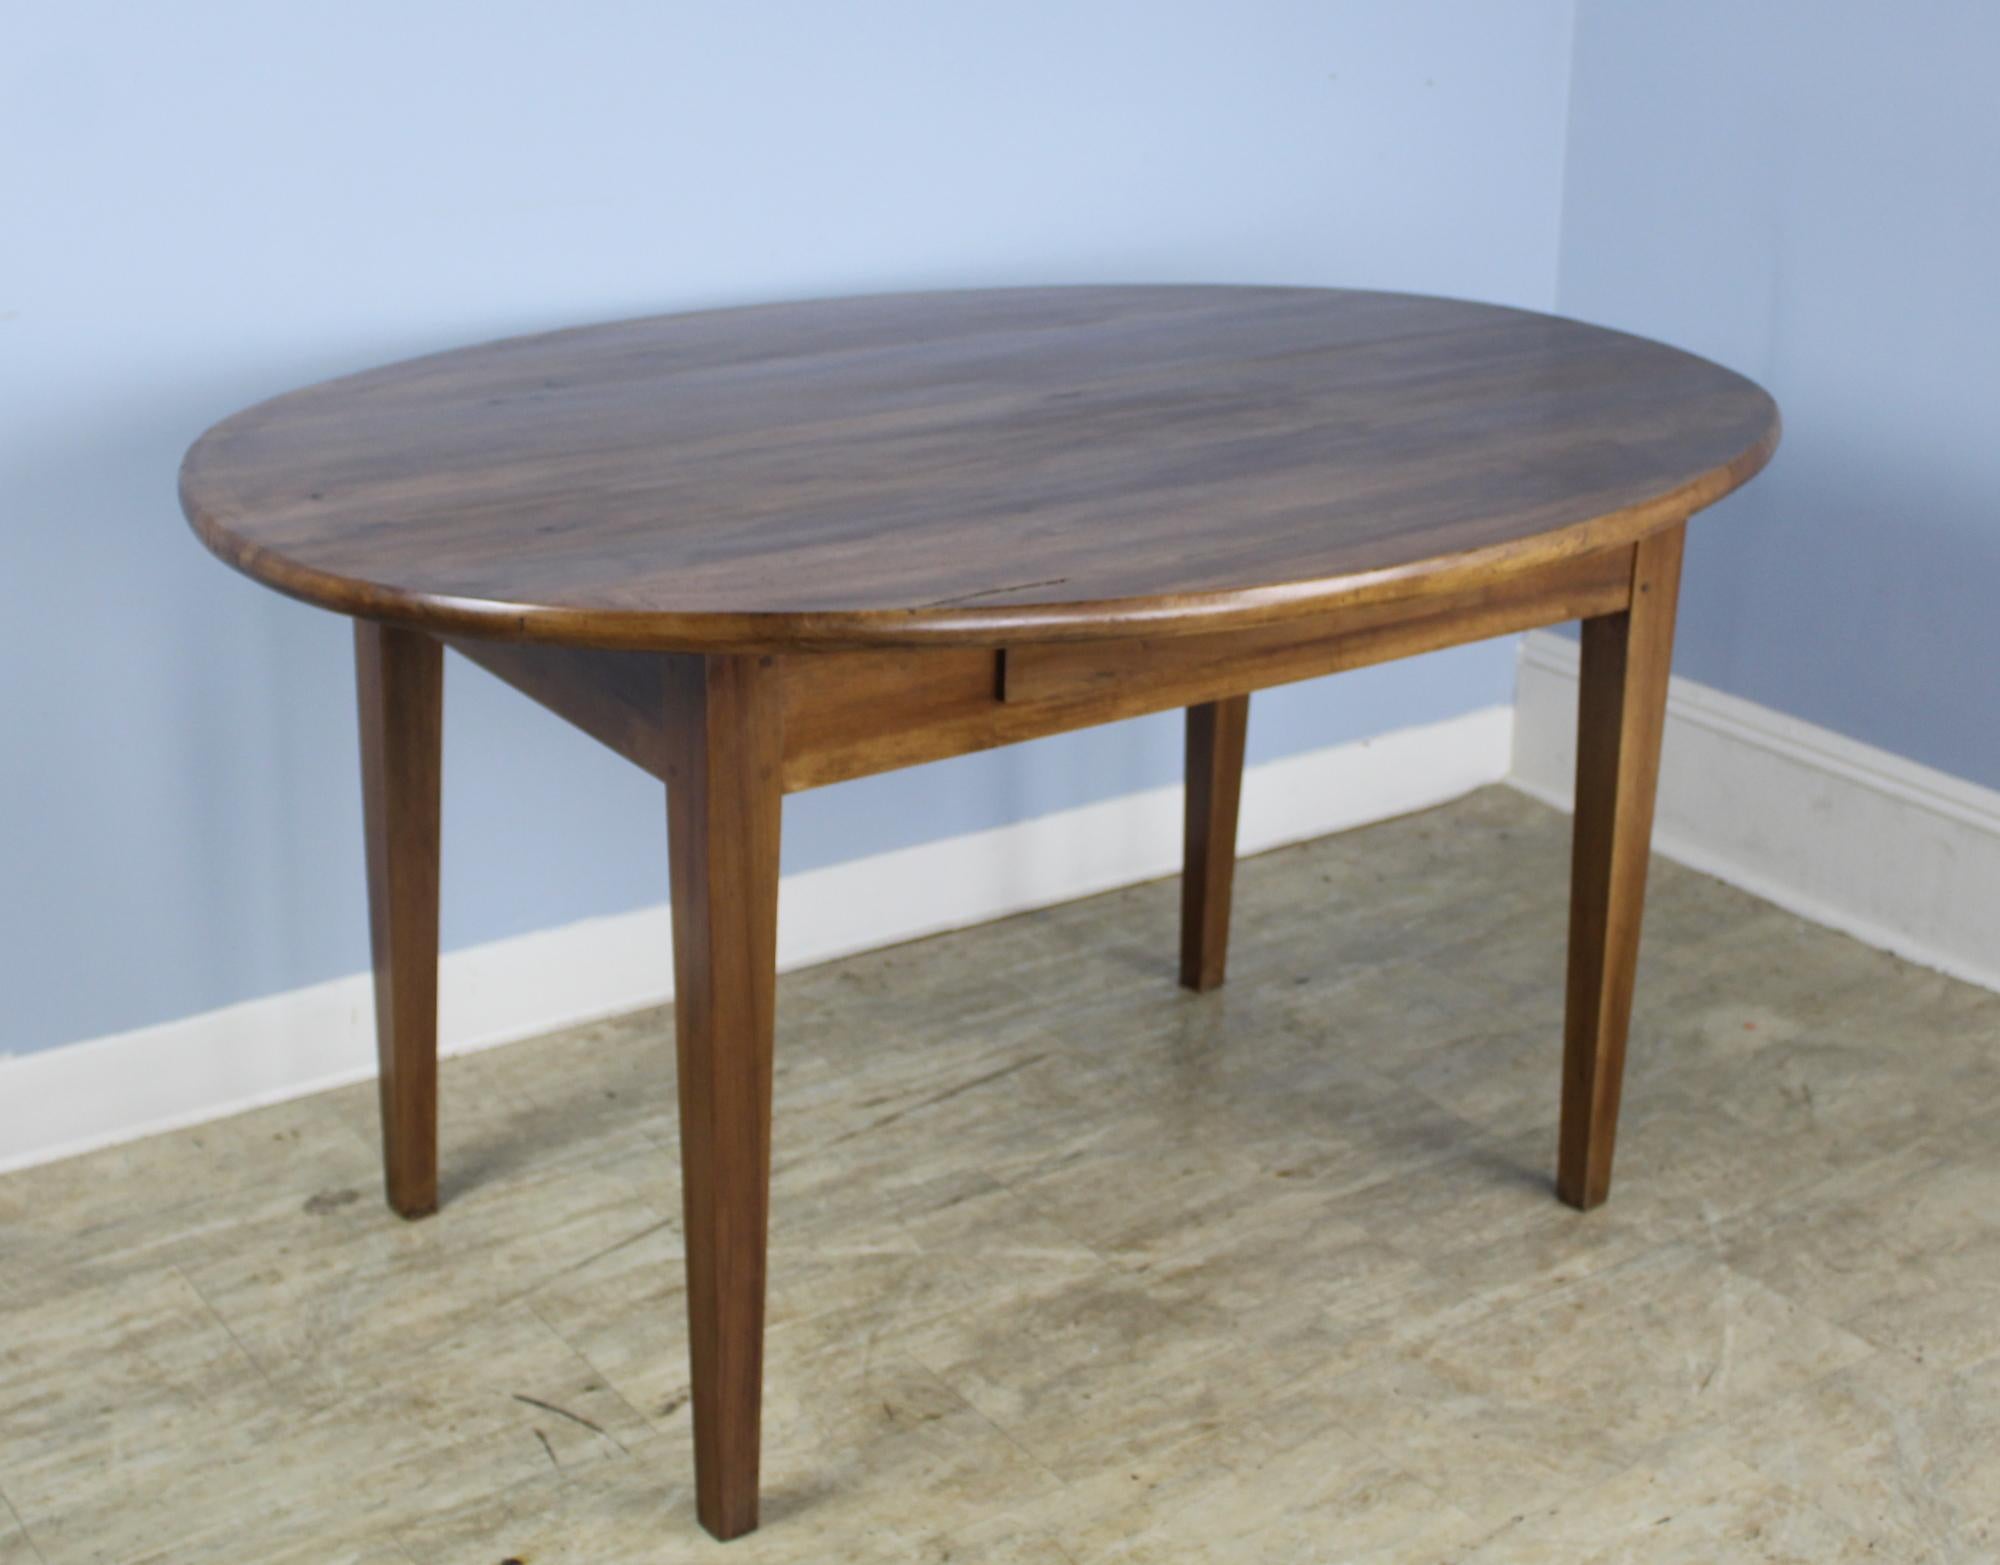 A simple and elegant oval dining table in mellow fruitwood with warm patina. The thick top is pretty and in good condition, nicely pegged at the legs. Apron height is 23 inches; the base is inset for seating comfort. There are a few small areas of